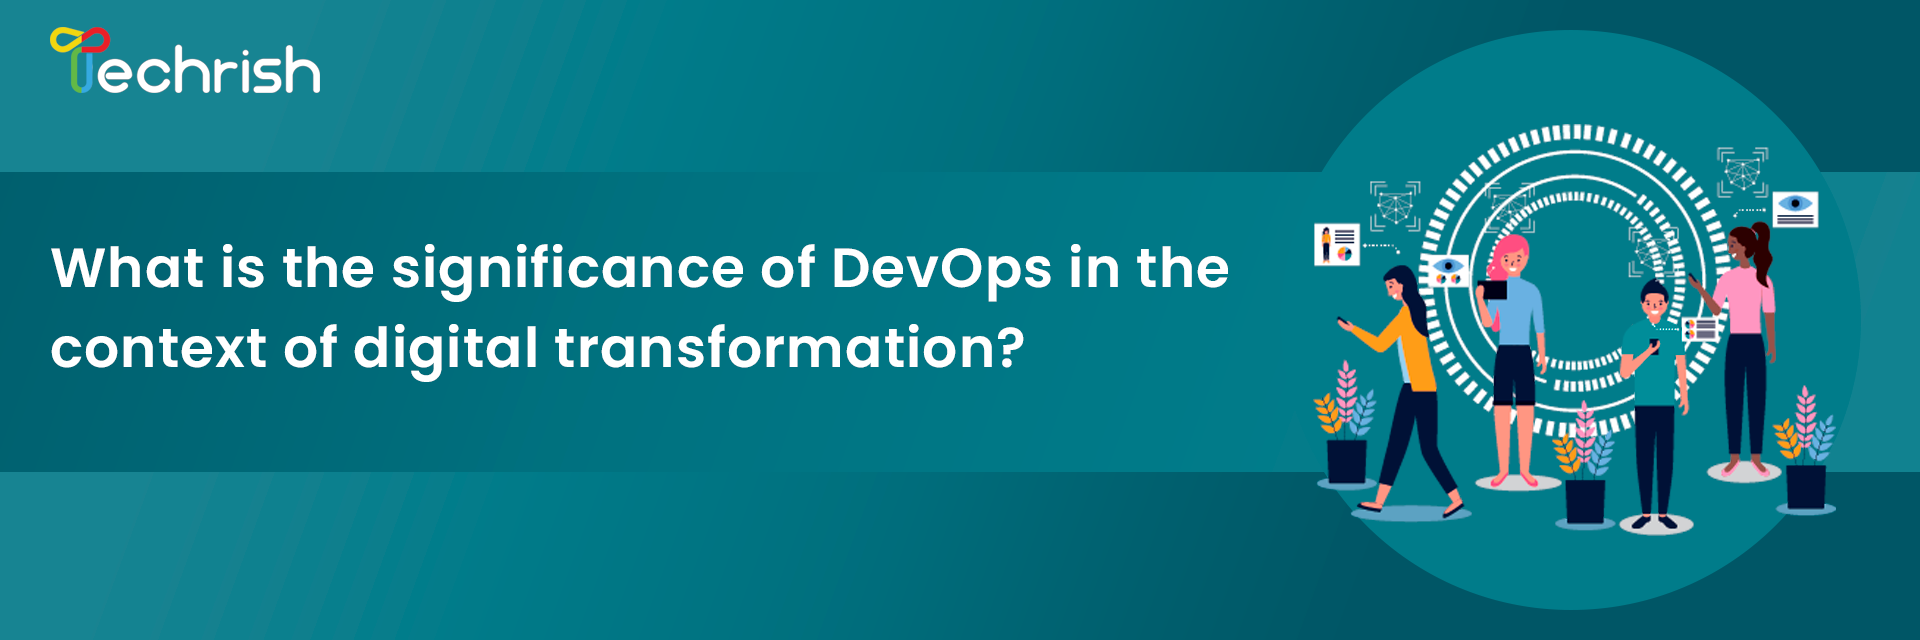 What is the significance of DevOps in the context of digital transformation?